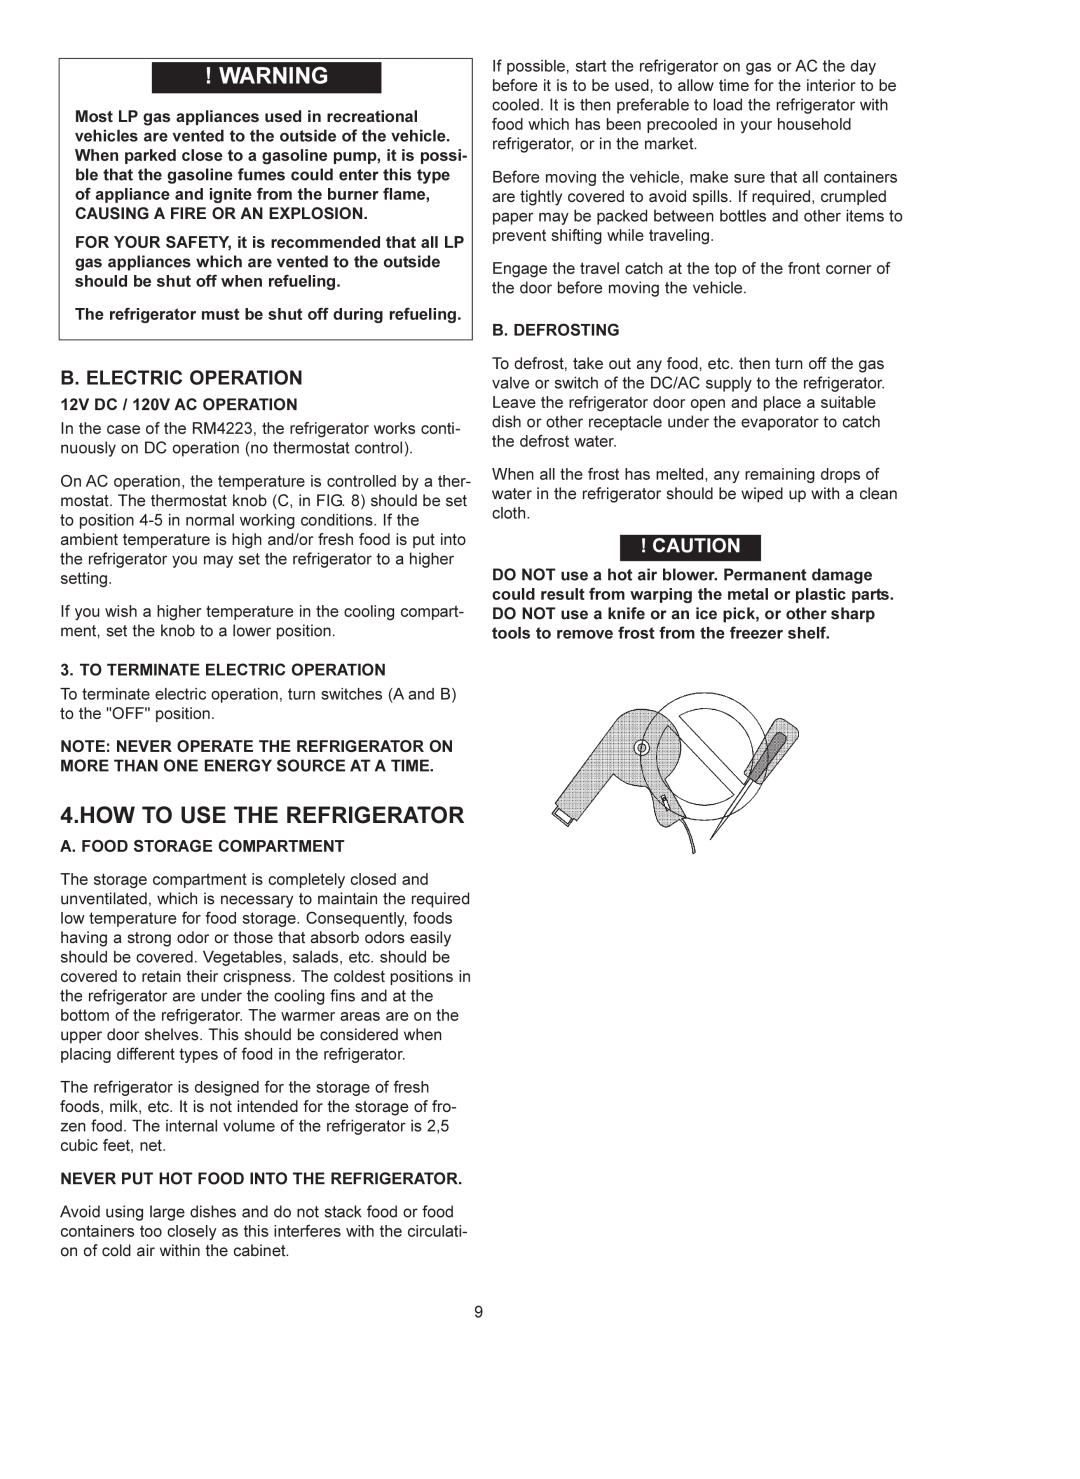 Dometic RM 4223 manual How To Use The Refrigerator, B. Electric Operation 